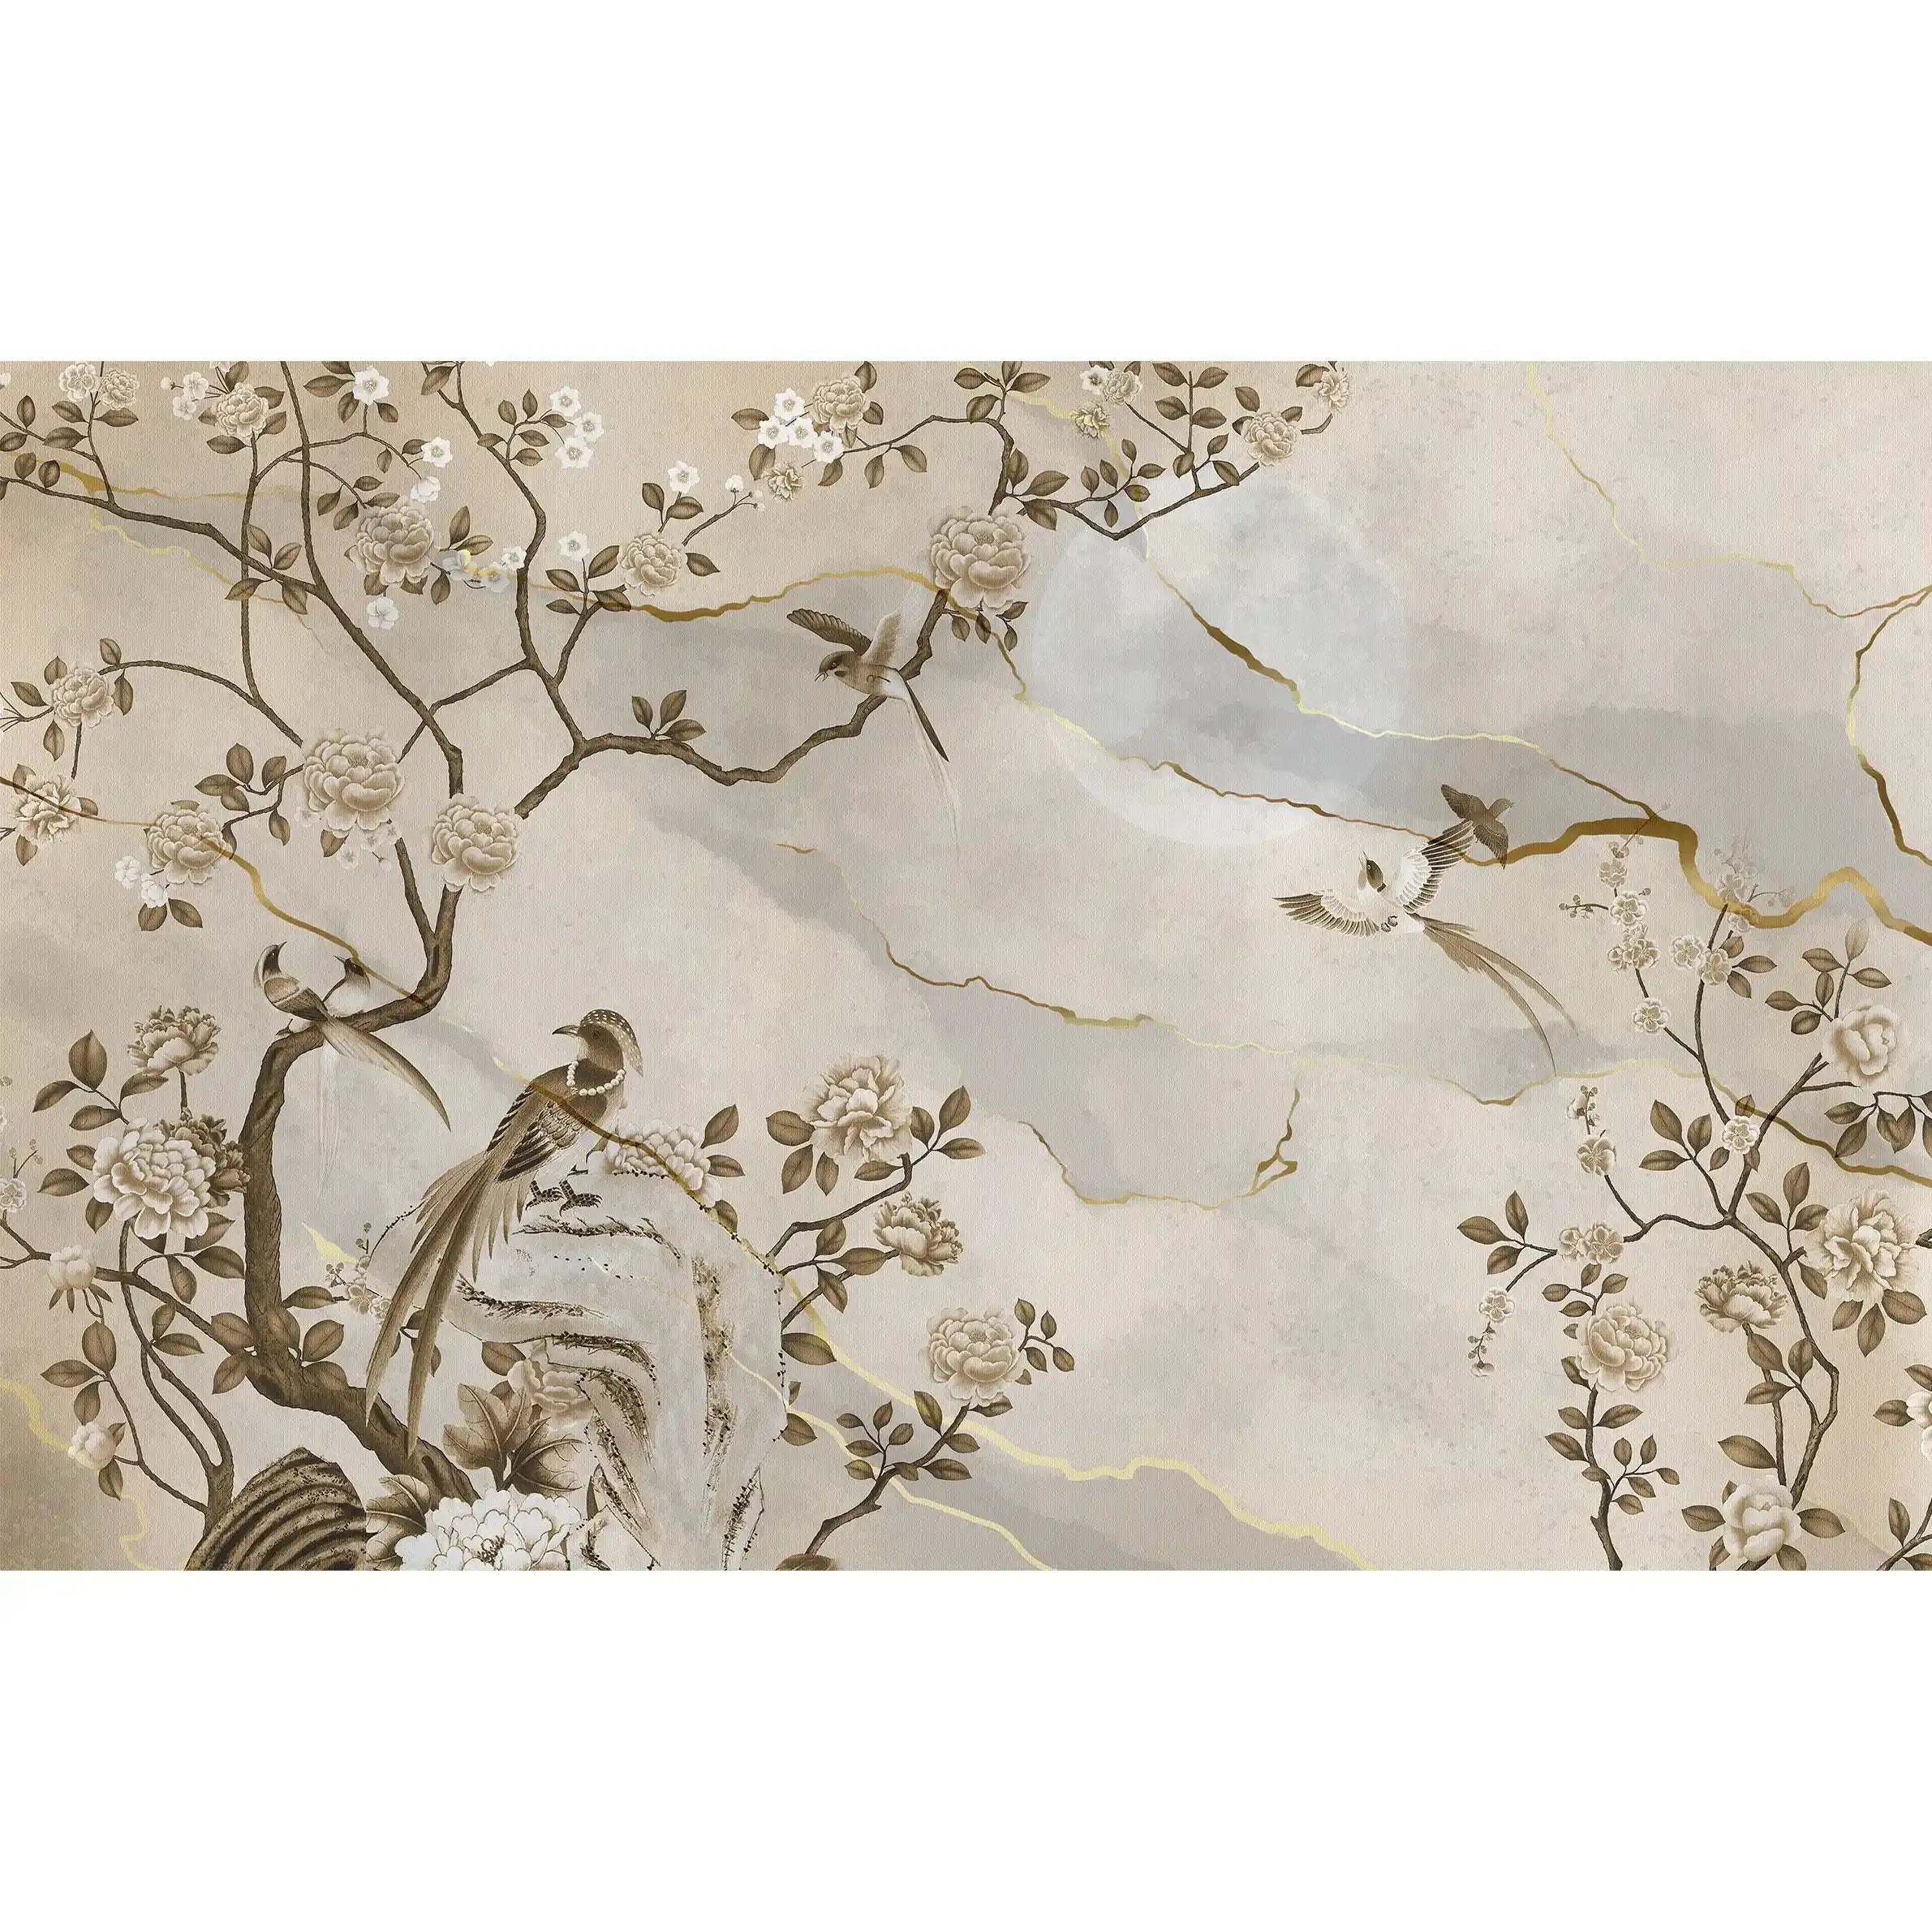 3055-D / Removable Wallpaper Peel and Stick - Chinese Painting, Vintage Floral Mural, Birds Natural Design, Easy Install, Boho Style - Artevella